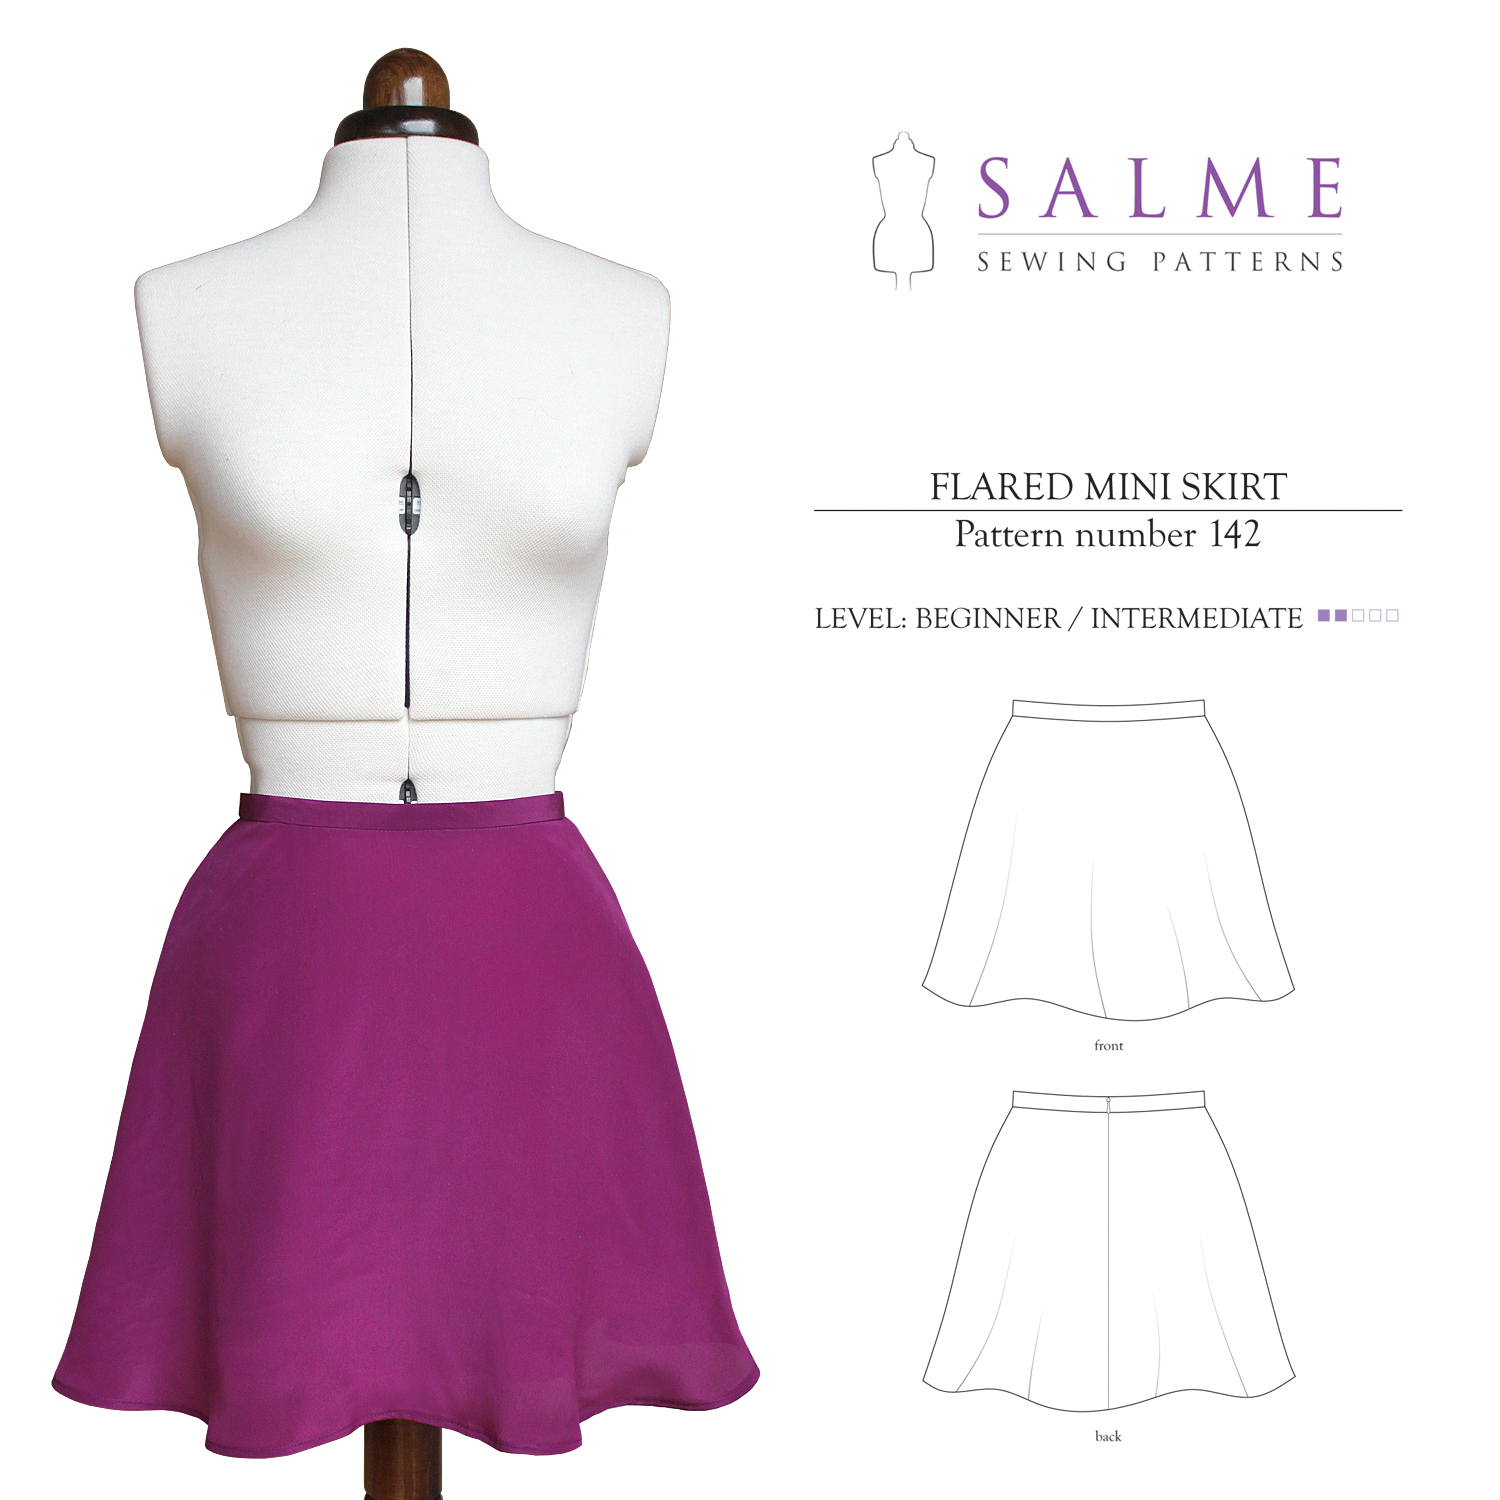 Short Flared Skirt Free Sewing Patterns Sewing Templates, Sewing ...